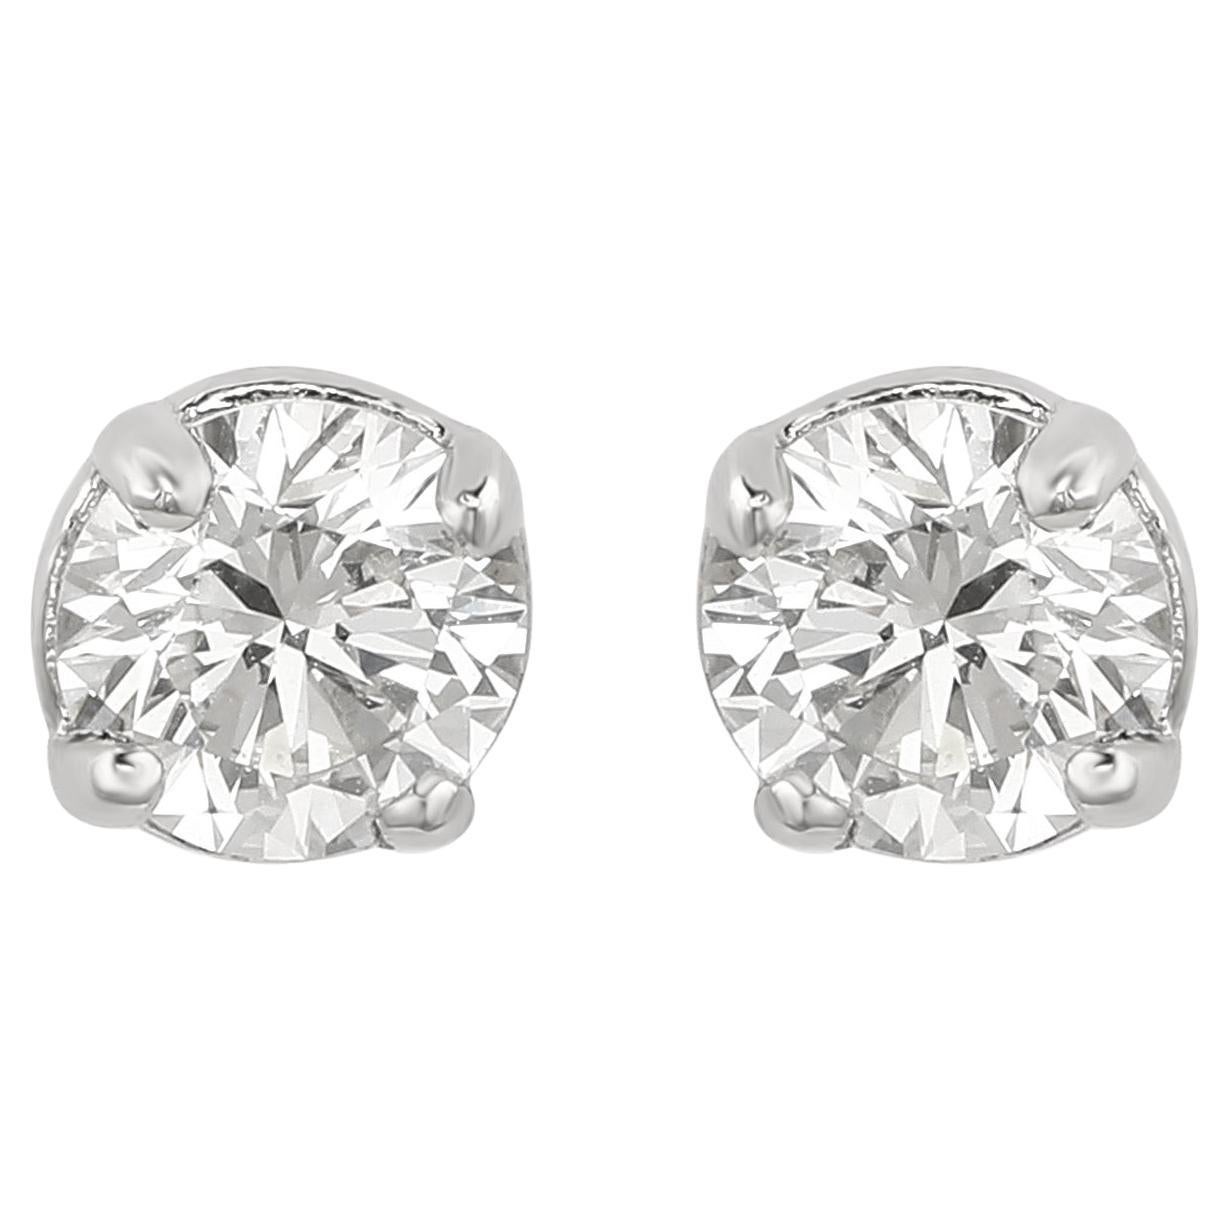 Suzy Levian 14K White Gold Classic Four-Prong 0.33 ct. tw. Diamond Stud Earrings For Sale